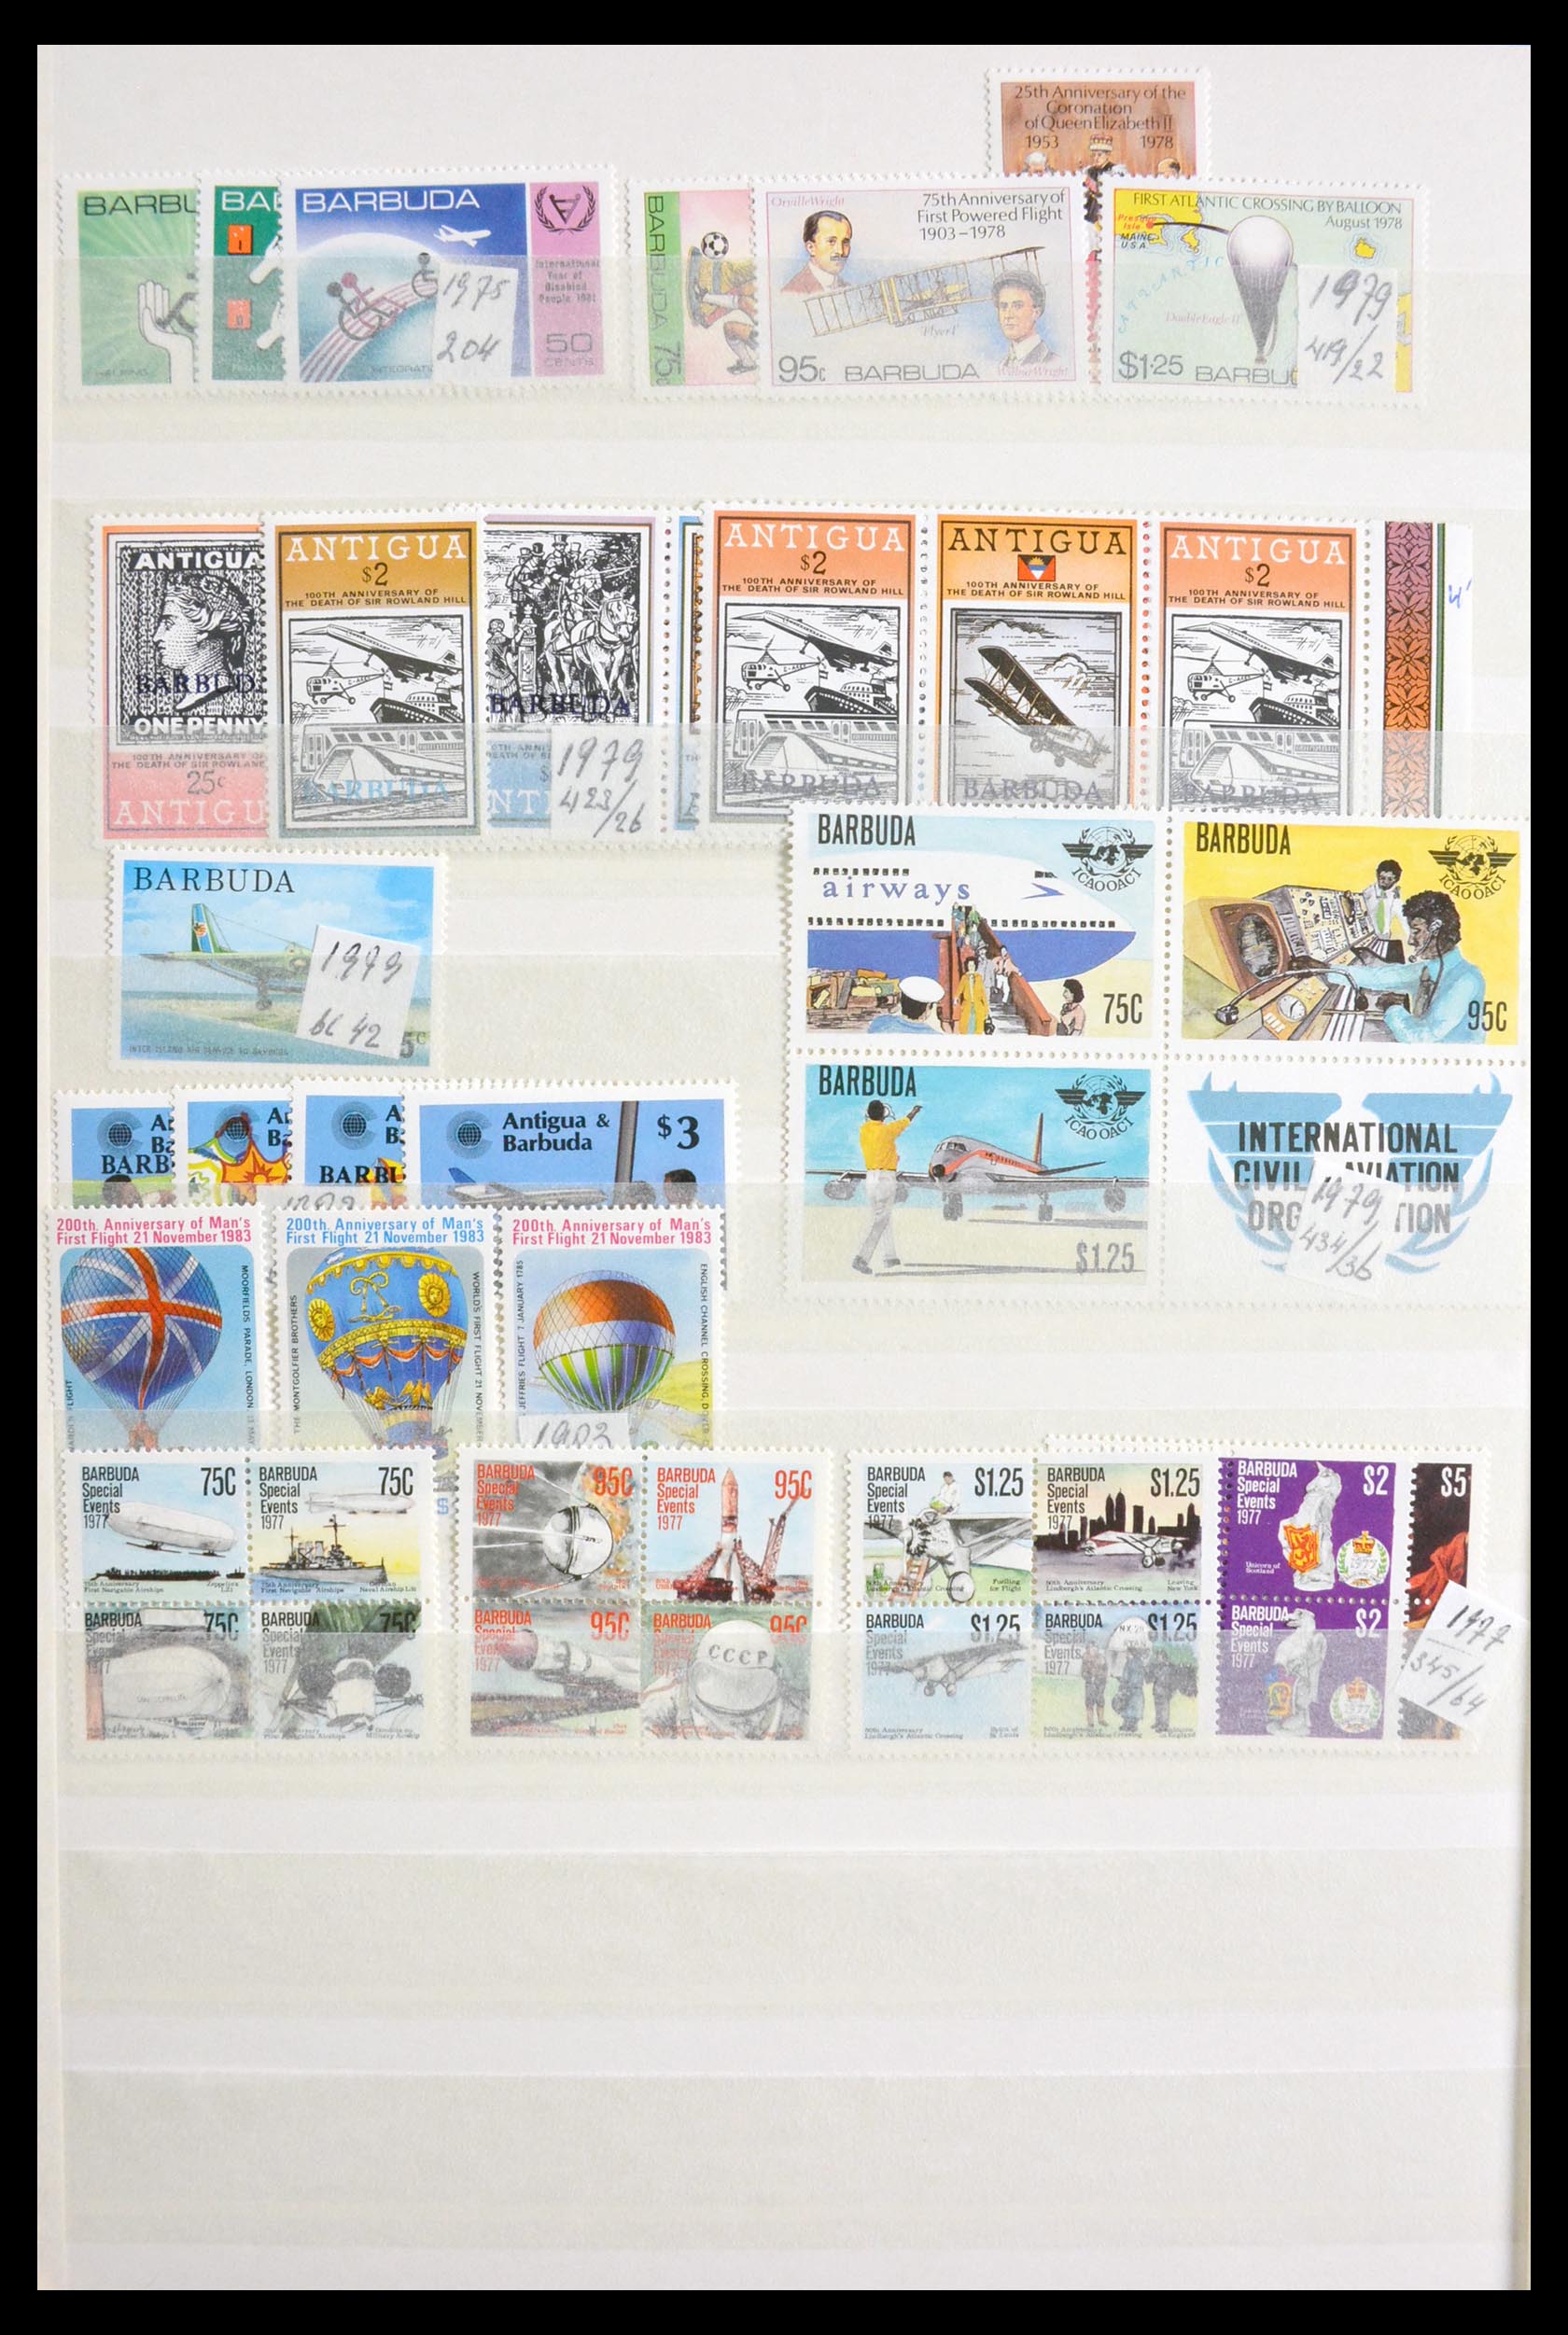 29917 014 - 29917 Latin America airmail stamps.